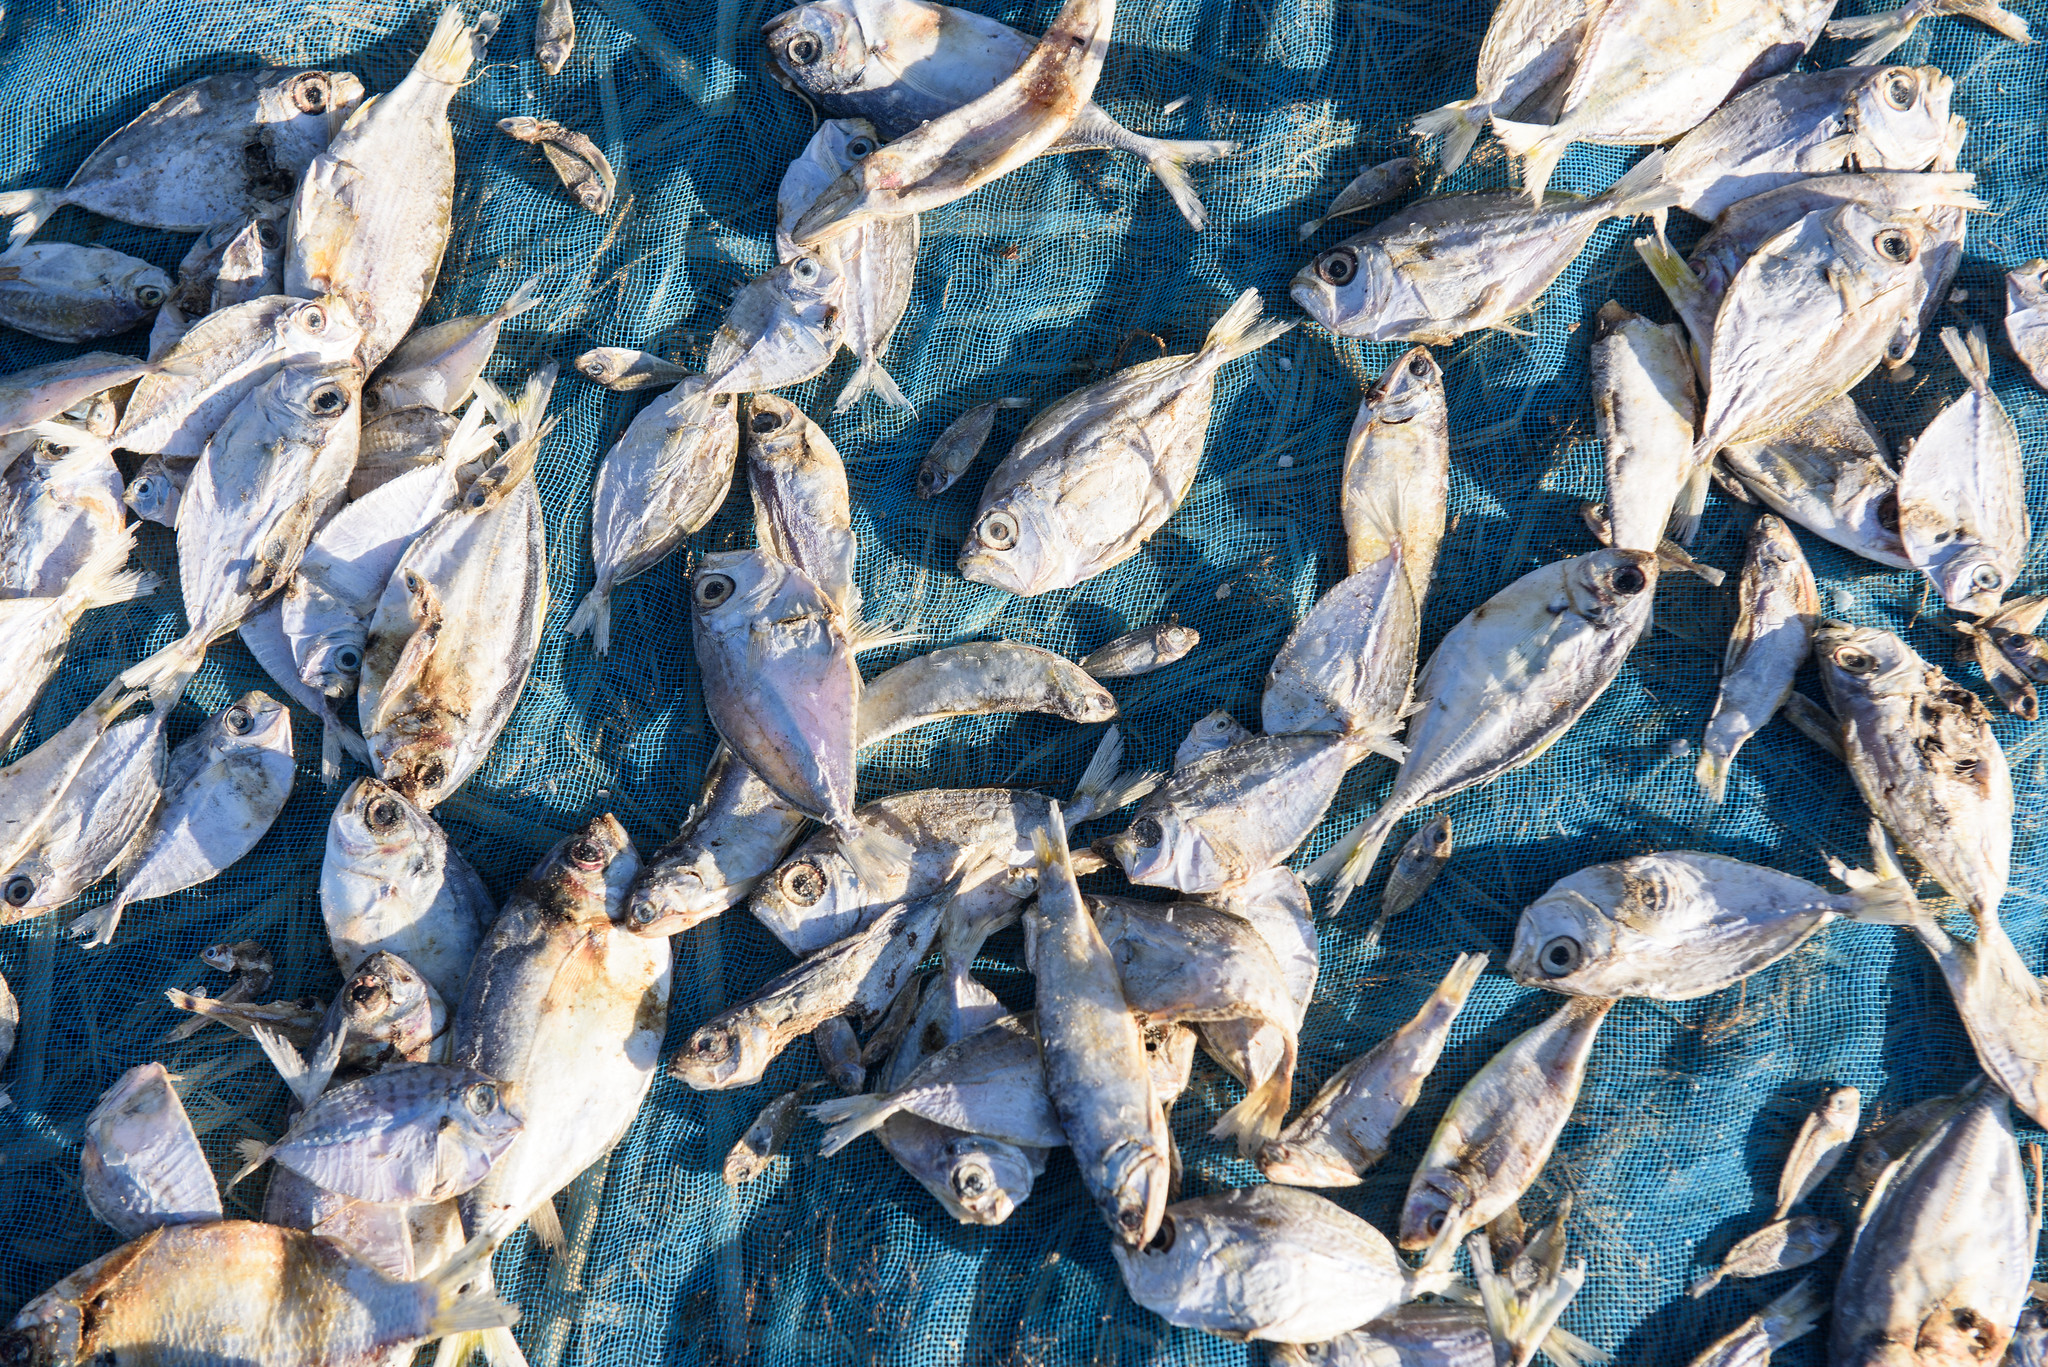 Drying small fish helps preserve its dense nutritional content and prevent loss and waste. Photo by Finn Thilsted